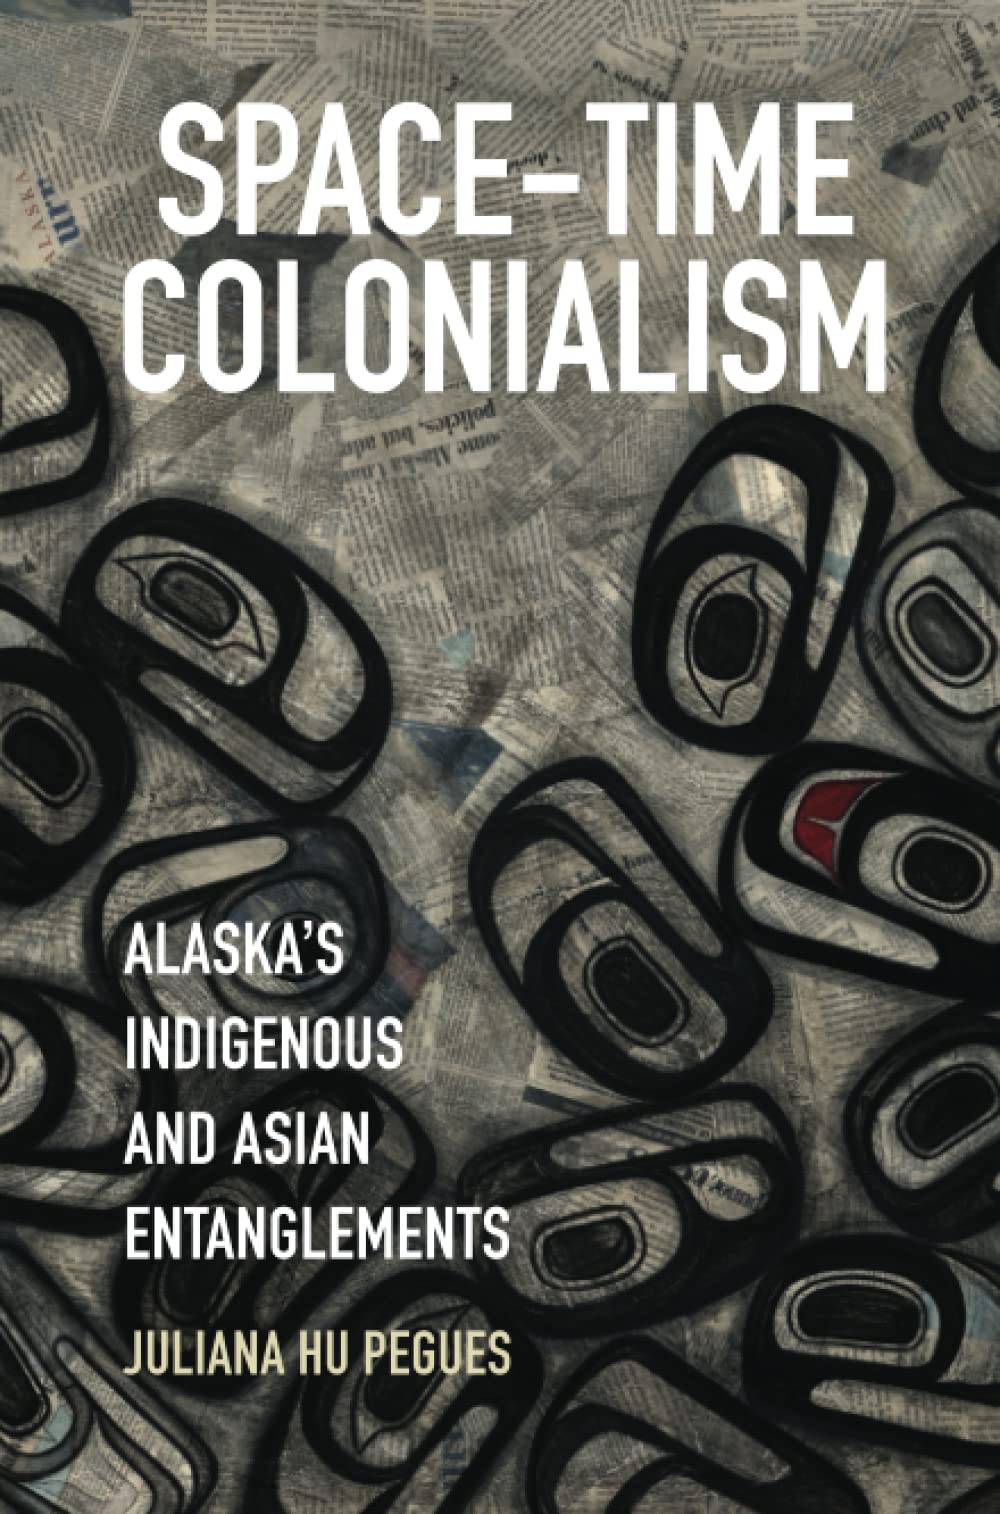 Space-Time Colonialism: Alaska's Indigenous and Asian Entanglements by Juliana Hu Pegues